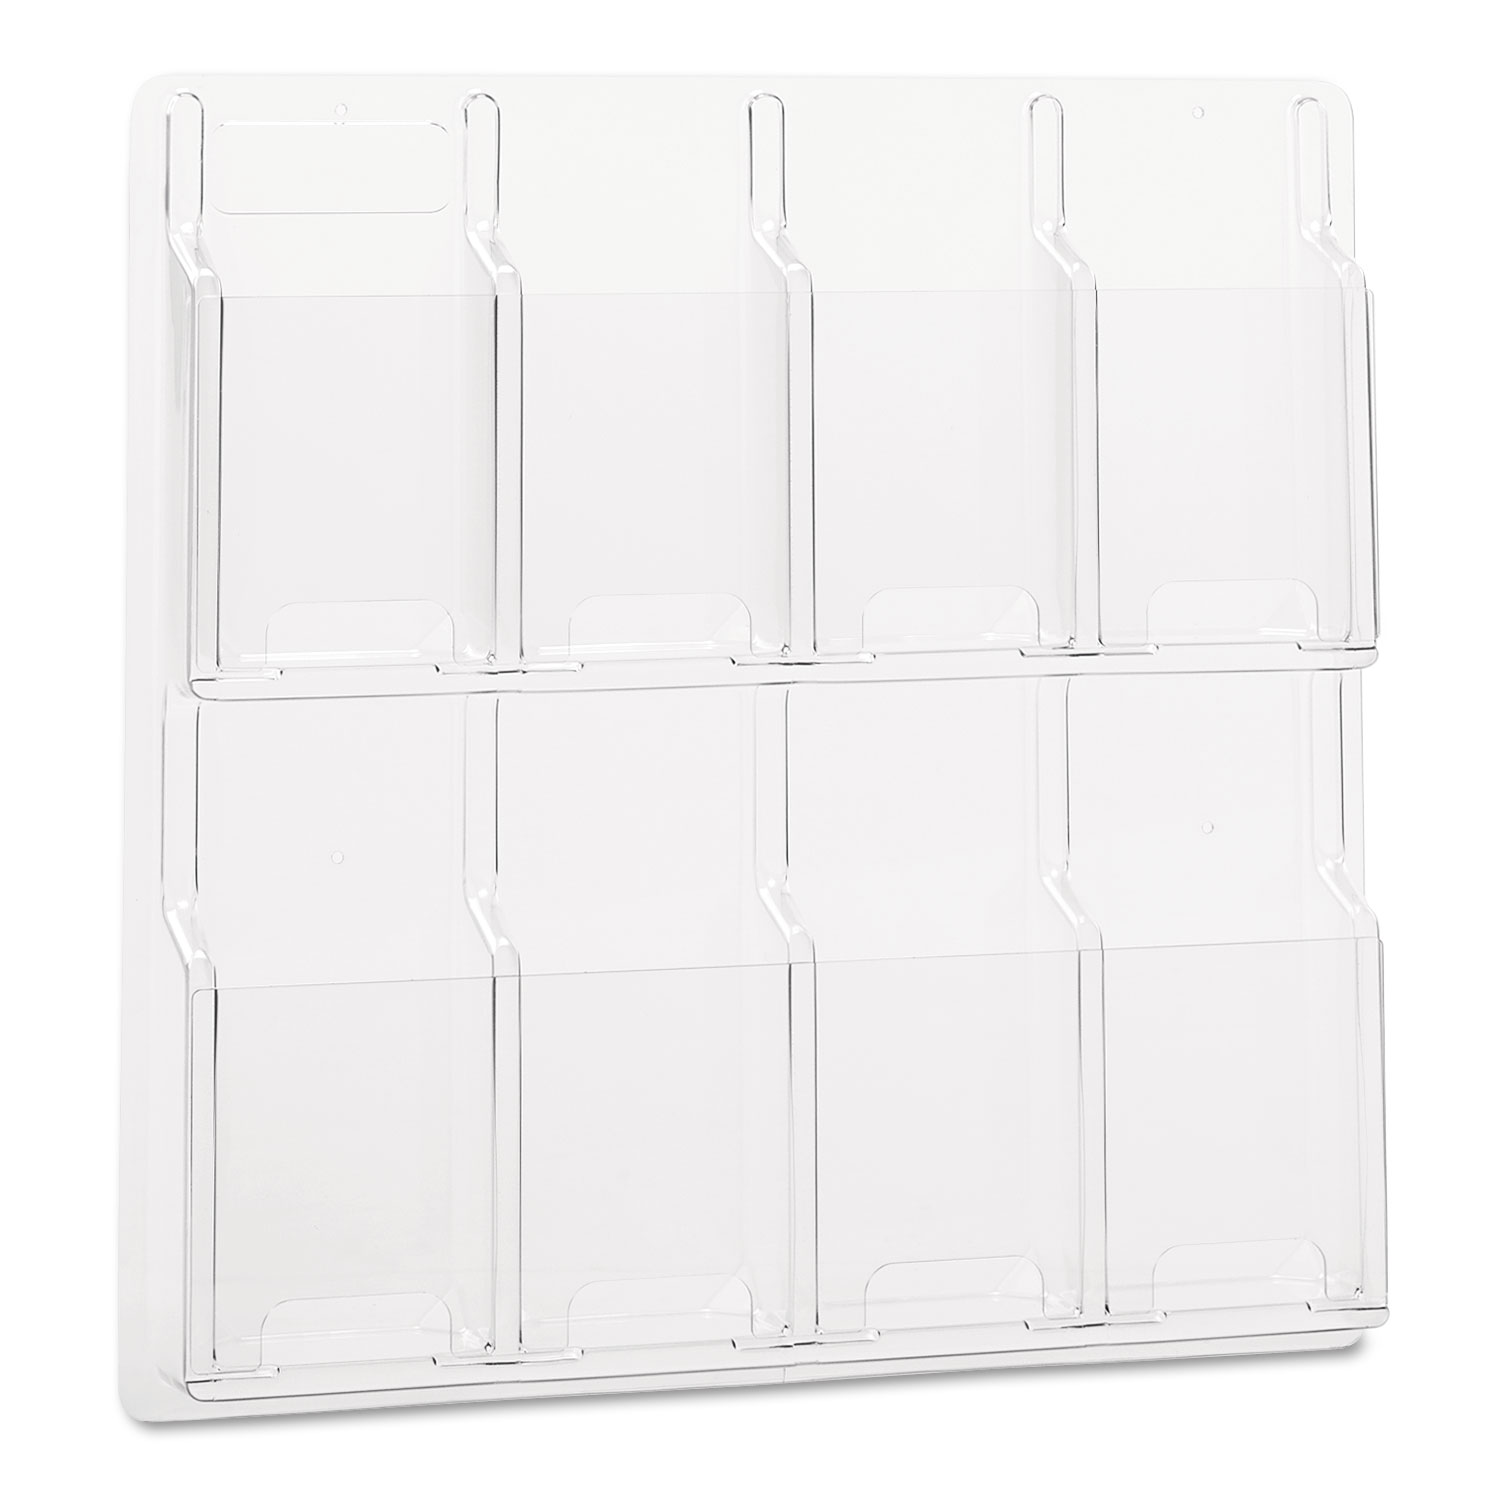  Safco 5608CL Reveal Clear Literature Displays, 8 Compartments, 20.5w x 2d x 20.5h, Clear (SAF5608CL) 